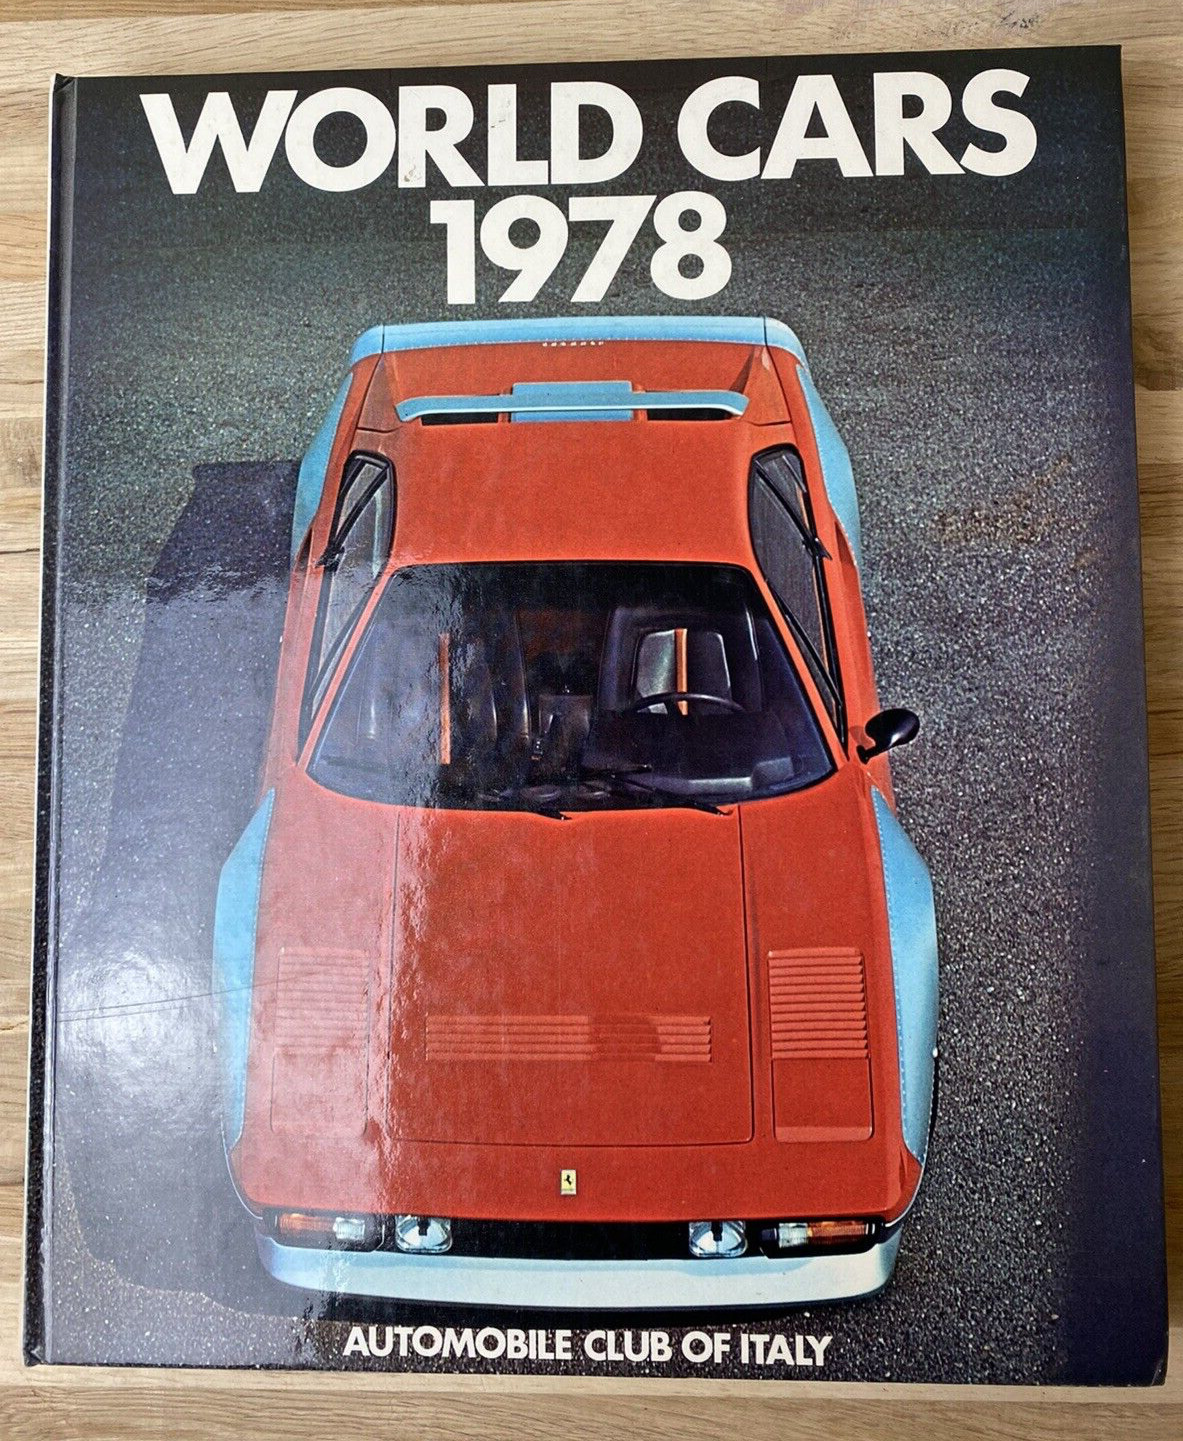 World Cars 1978 Vintage Book Classic Cars Muscle Antique Auto ITALY